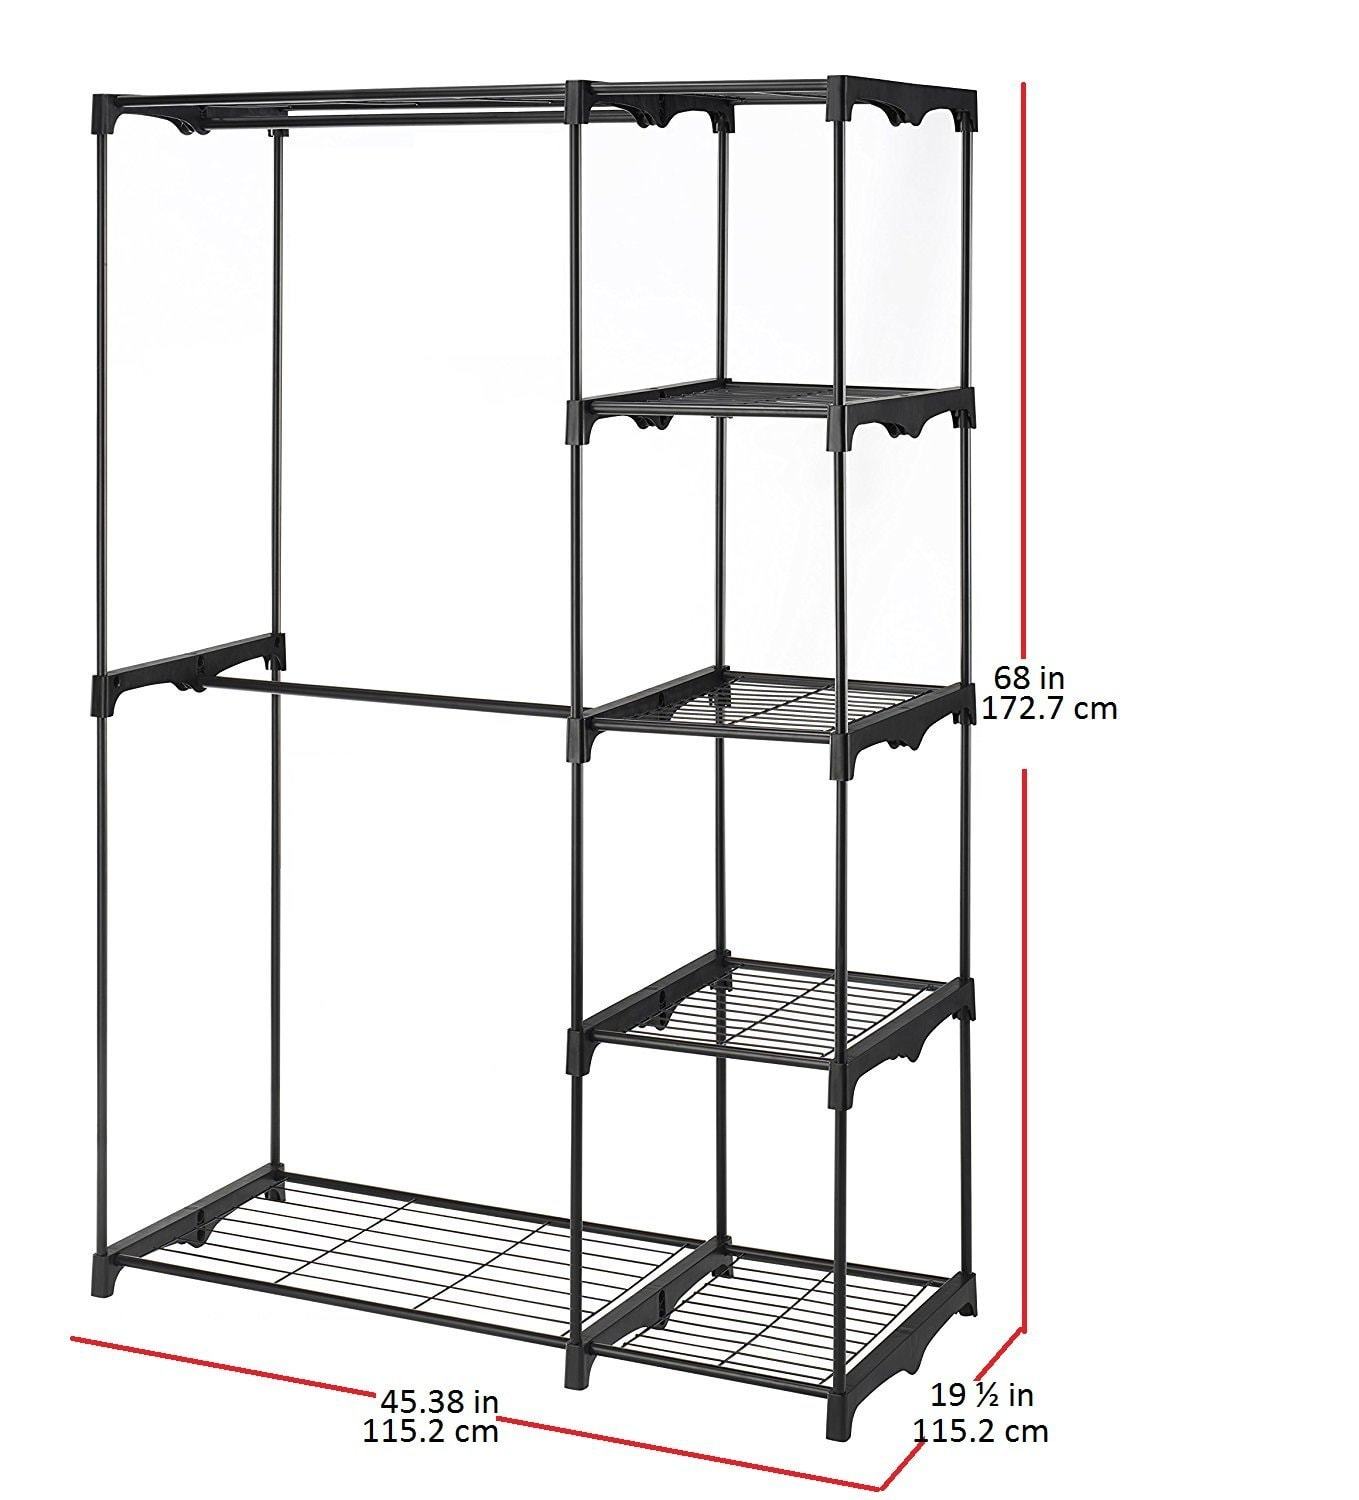 Shop for whitmor freestanding portable closet organizer heavy duty black steel frame double rod wardrobe cloths storage with 5 shelves shoe rack for home or office size 45 1 4 x 19 1 4 x 68